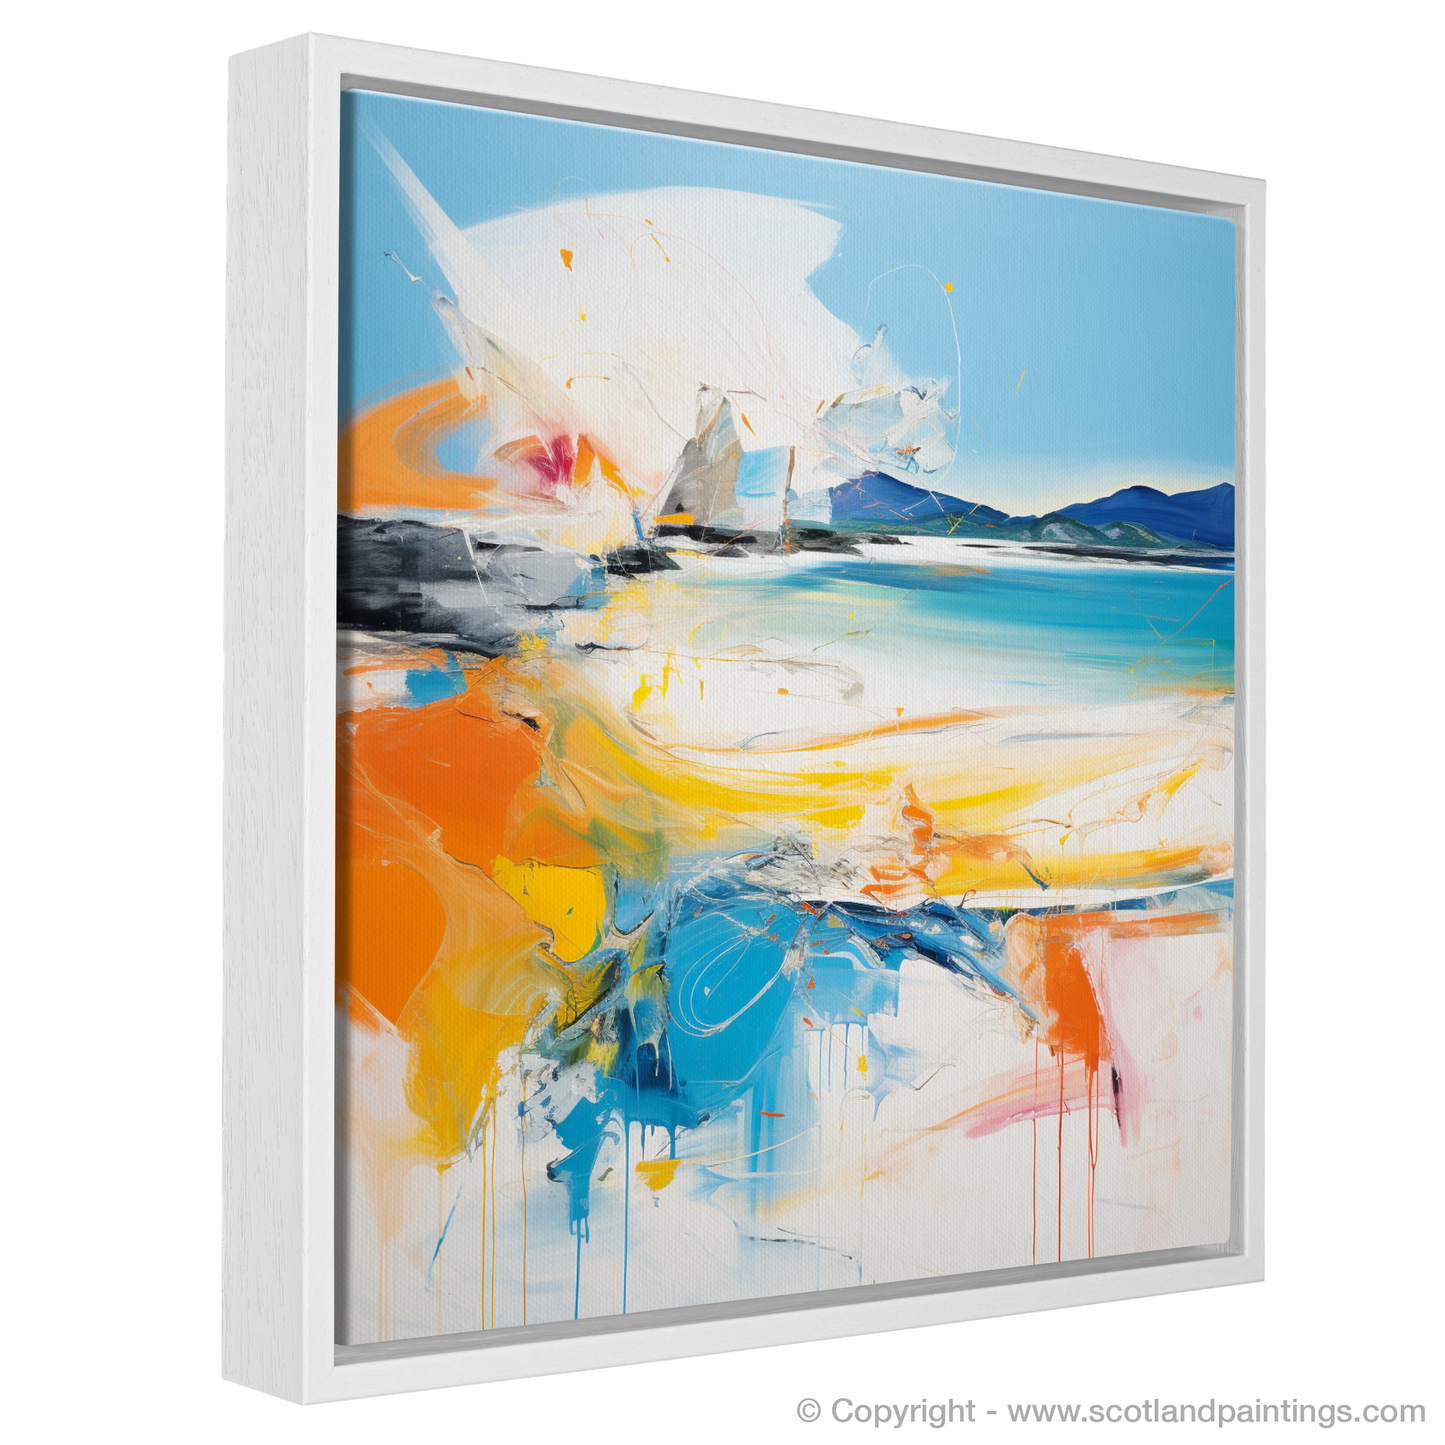 Kiloran Bay Rhapsody: An Abstract Expressionist Ode to Scottish Beaches